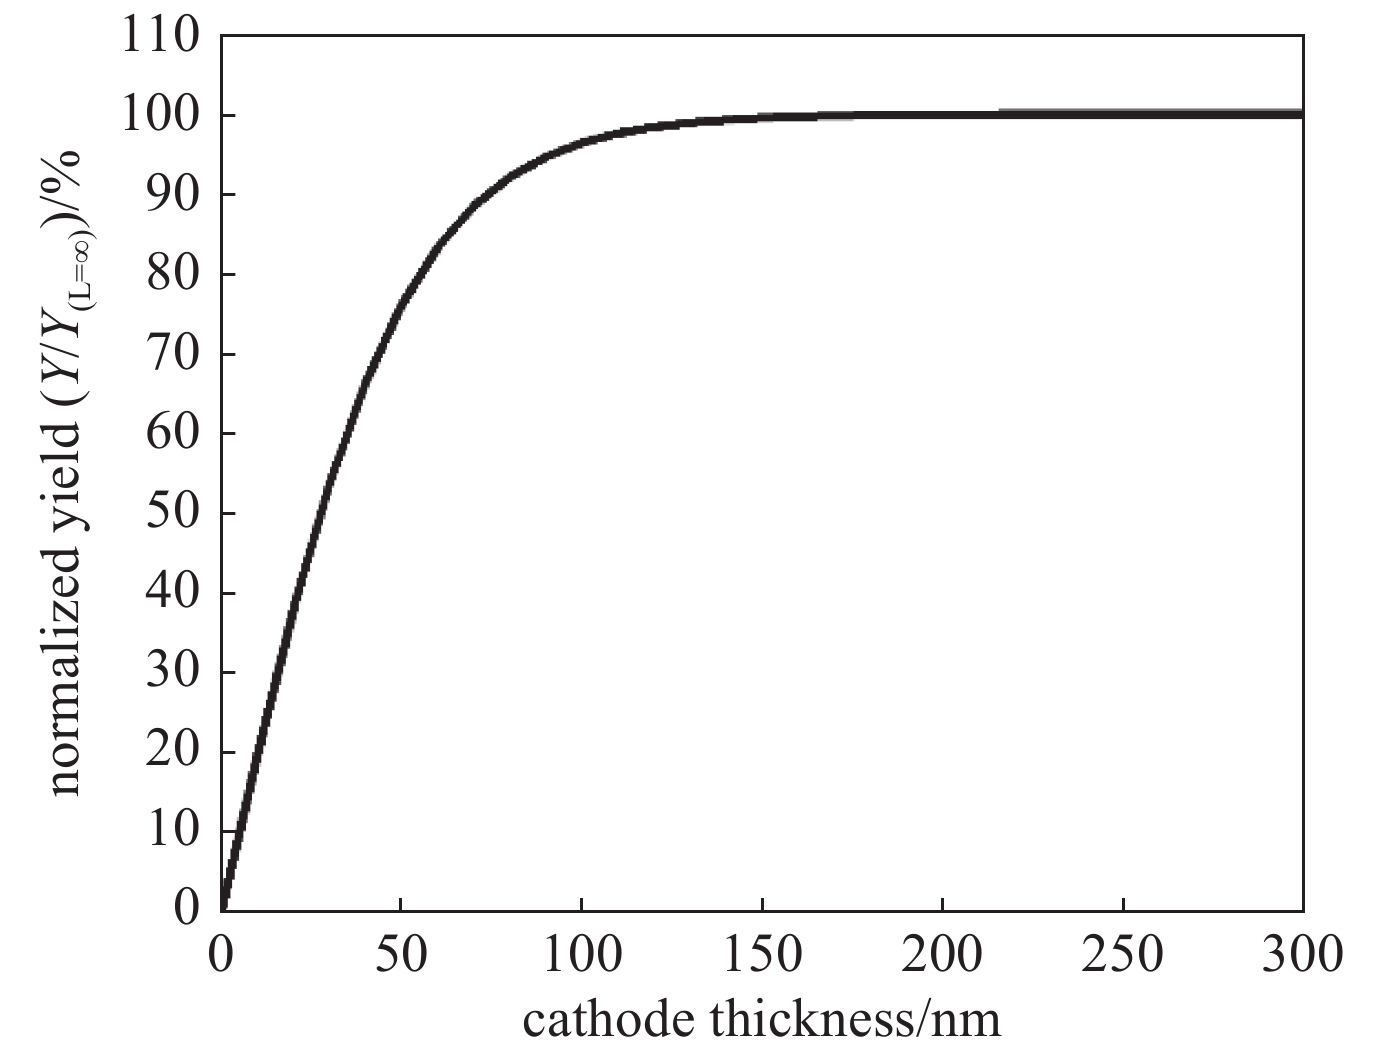 Normalized yield of reflection mode CsI photocathode as a function of cathode thickness